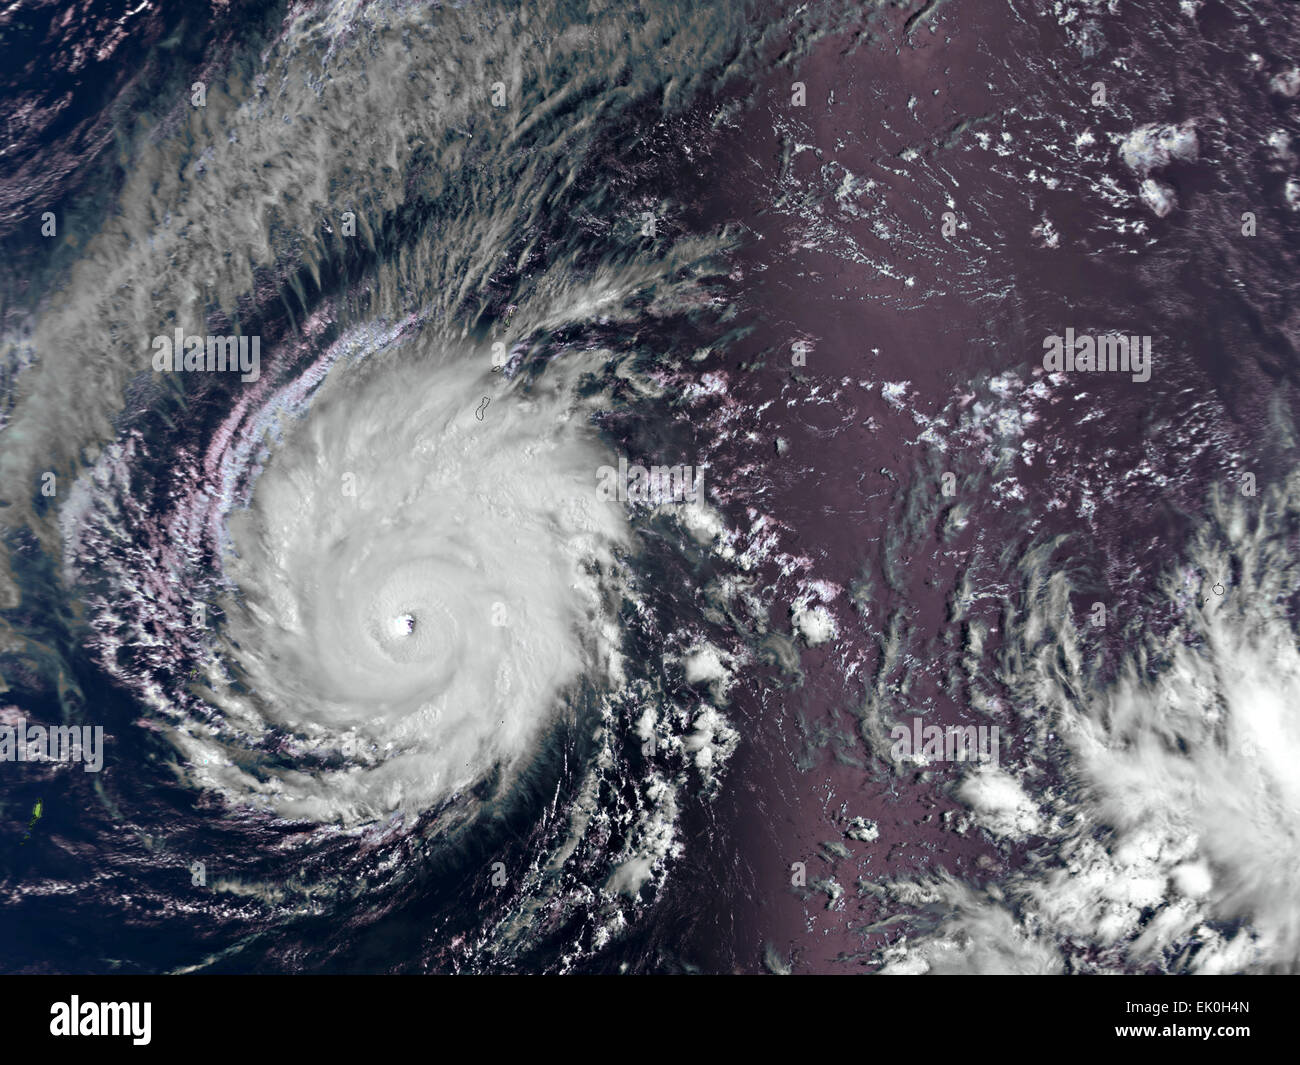 View of the massive category 5 Typhoon Maysak as it approaches the Philippine Islands March 30, 2015 captured by the AVHRR instrument onboard EUMETSAT's Metop-B polar-orbiting satellite. The super Typhoon is expected to land on the upcoming Easter weekend. Stock Photo